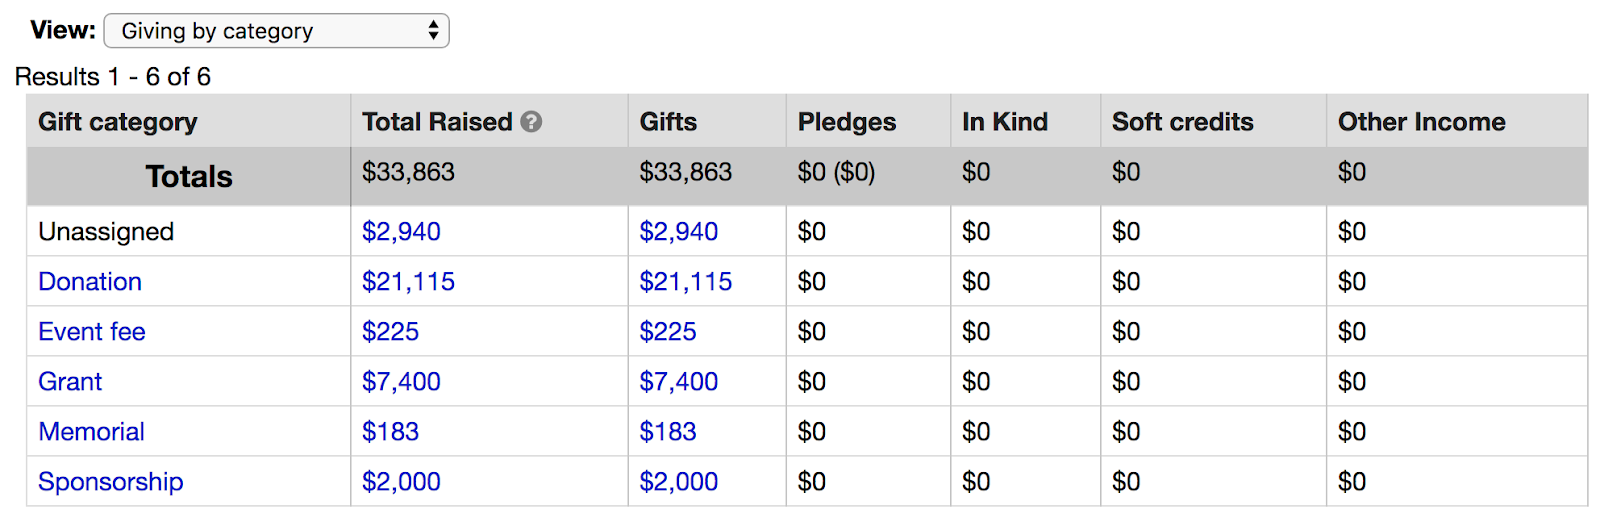 giving by gift category